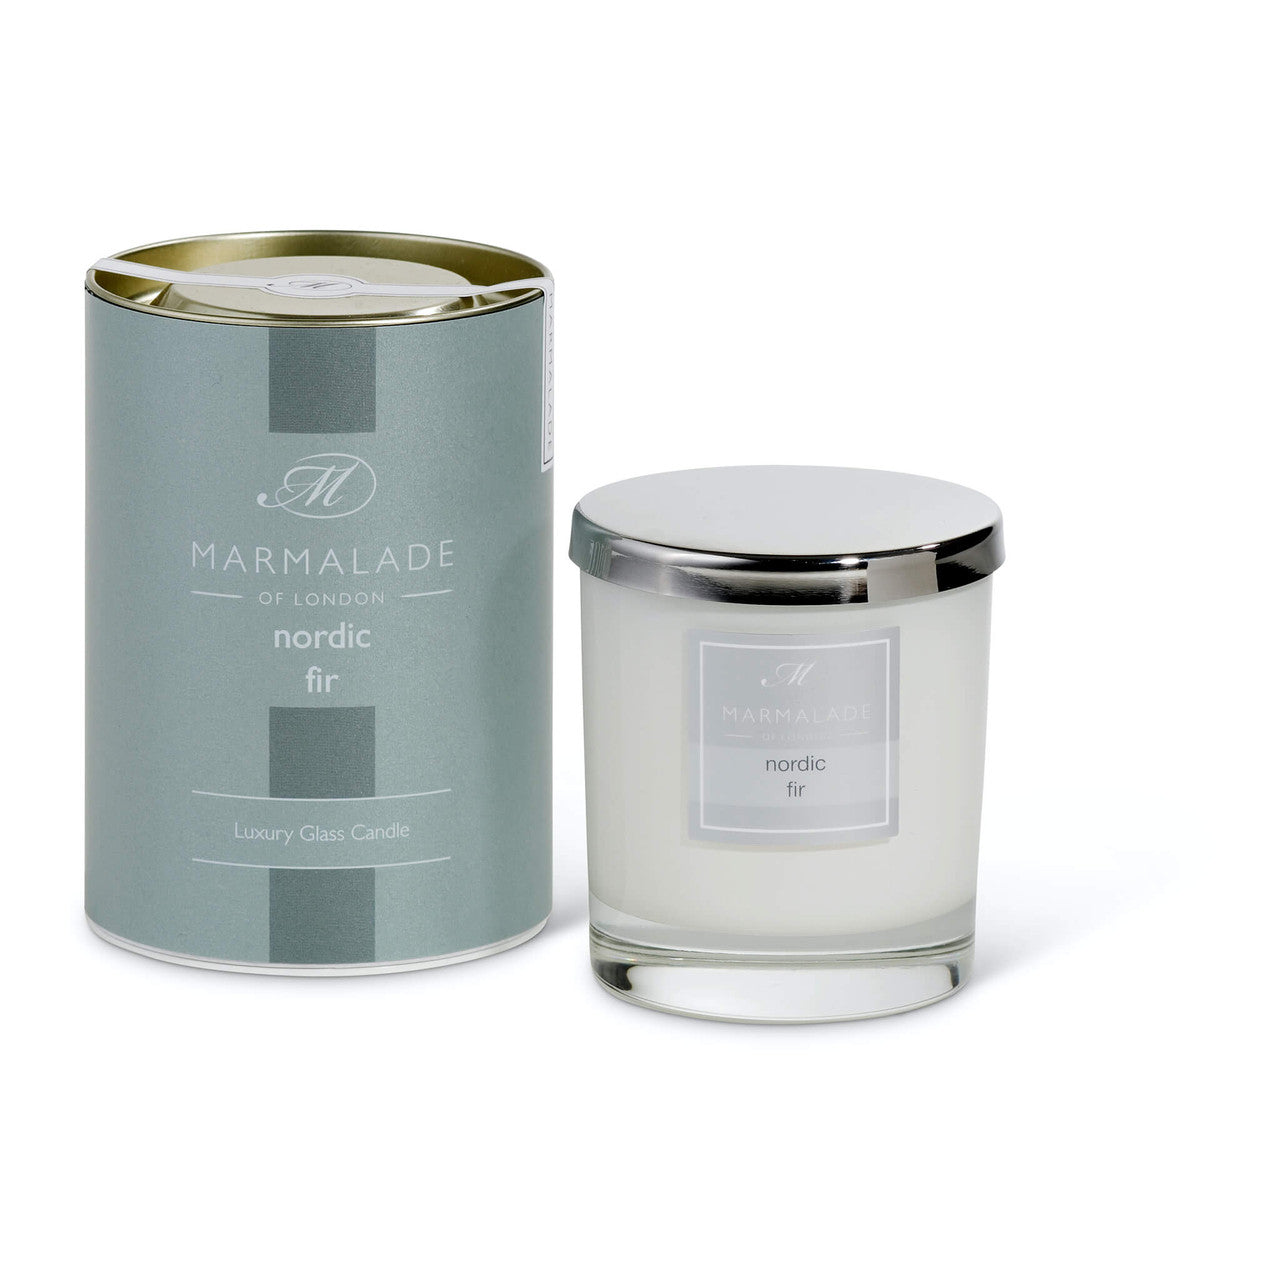 Nordic Fir glass candle from Marmalade of London.